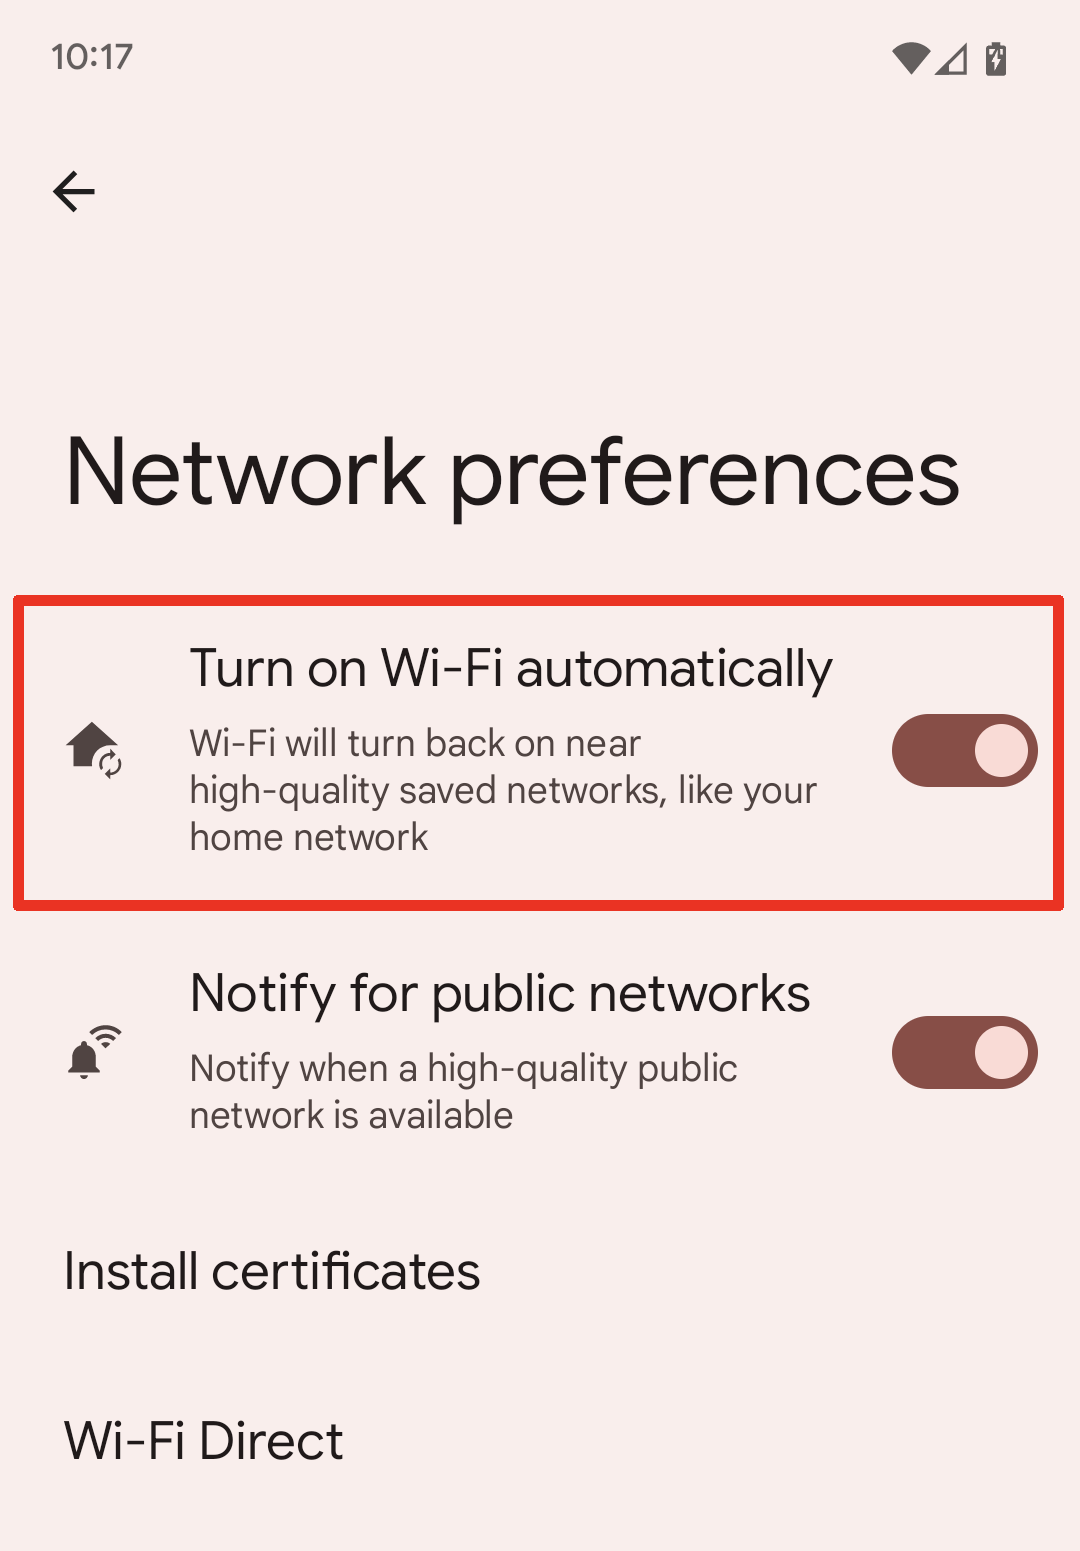 Turn on Wi-Fi automatically feature